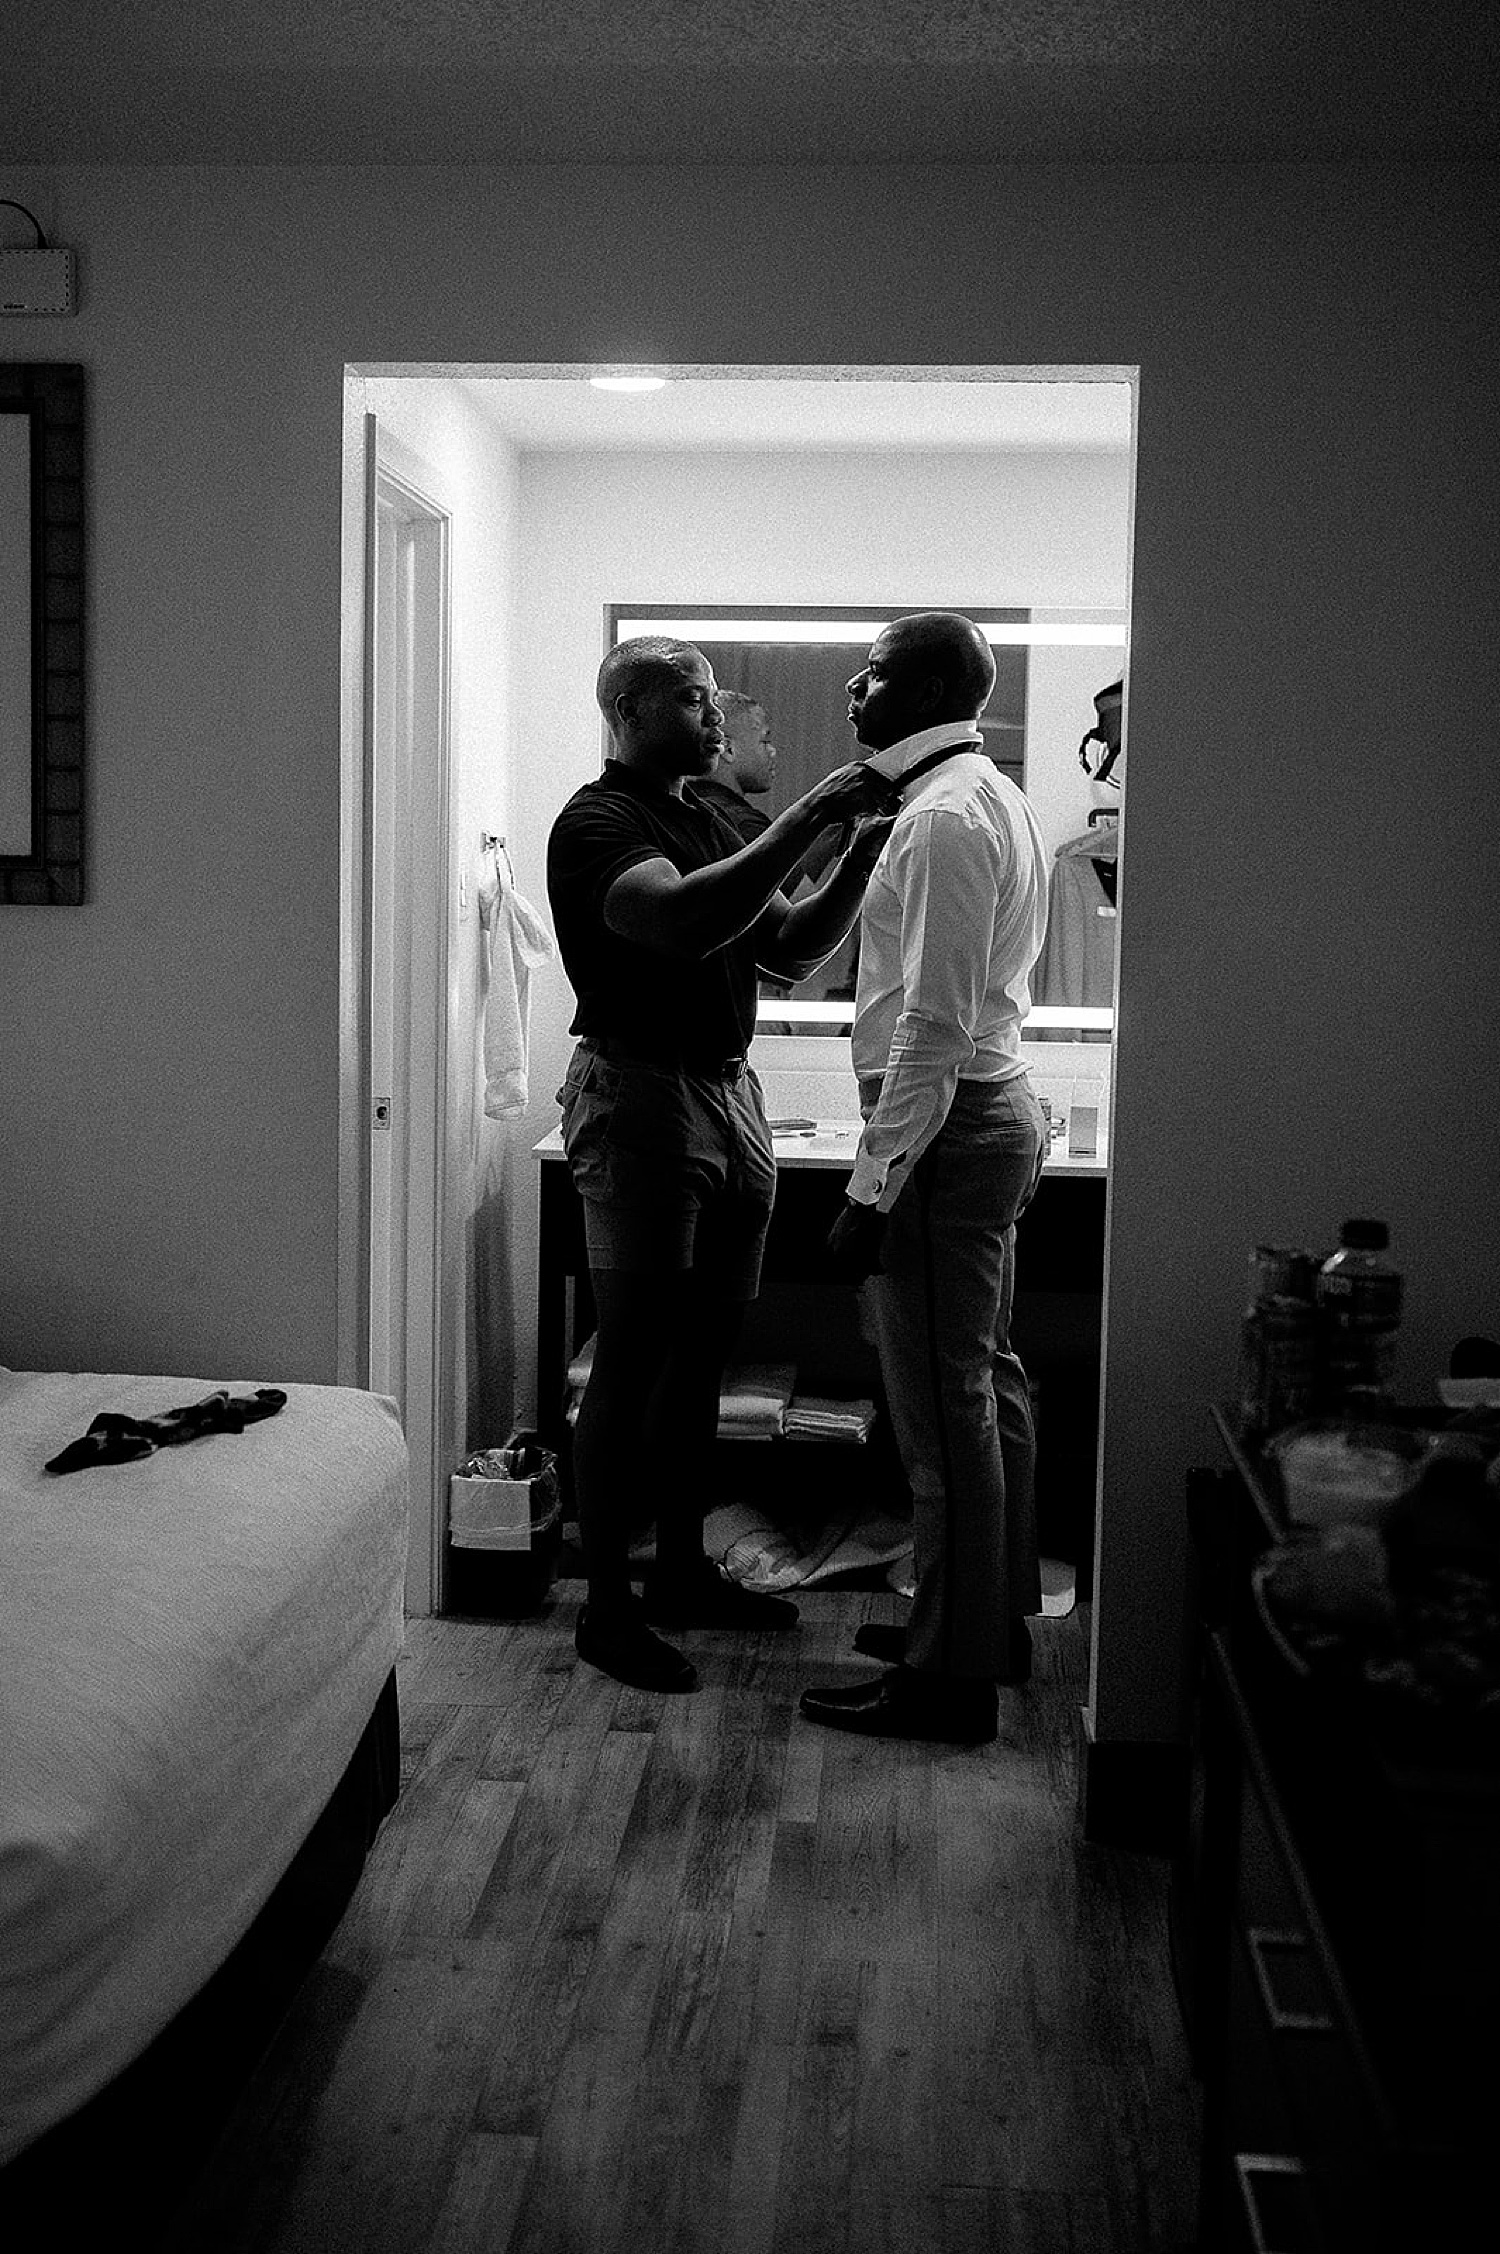 Groom and groomsmen finalize getting ready in hotel room in Destin Florida with wedding photographer